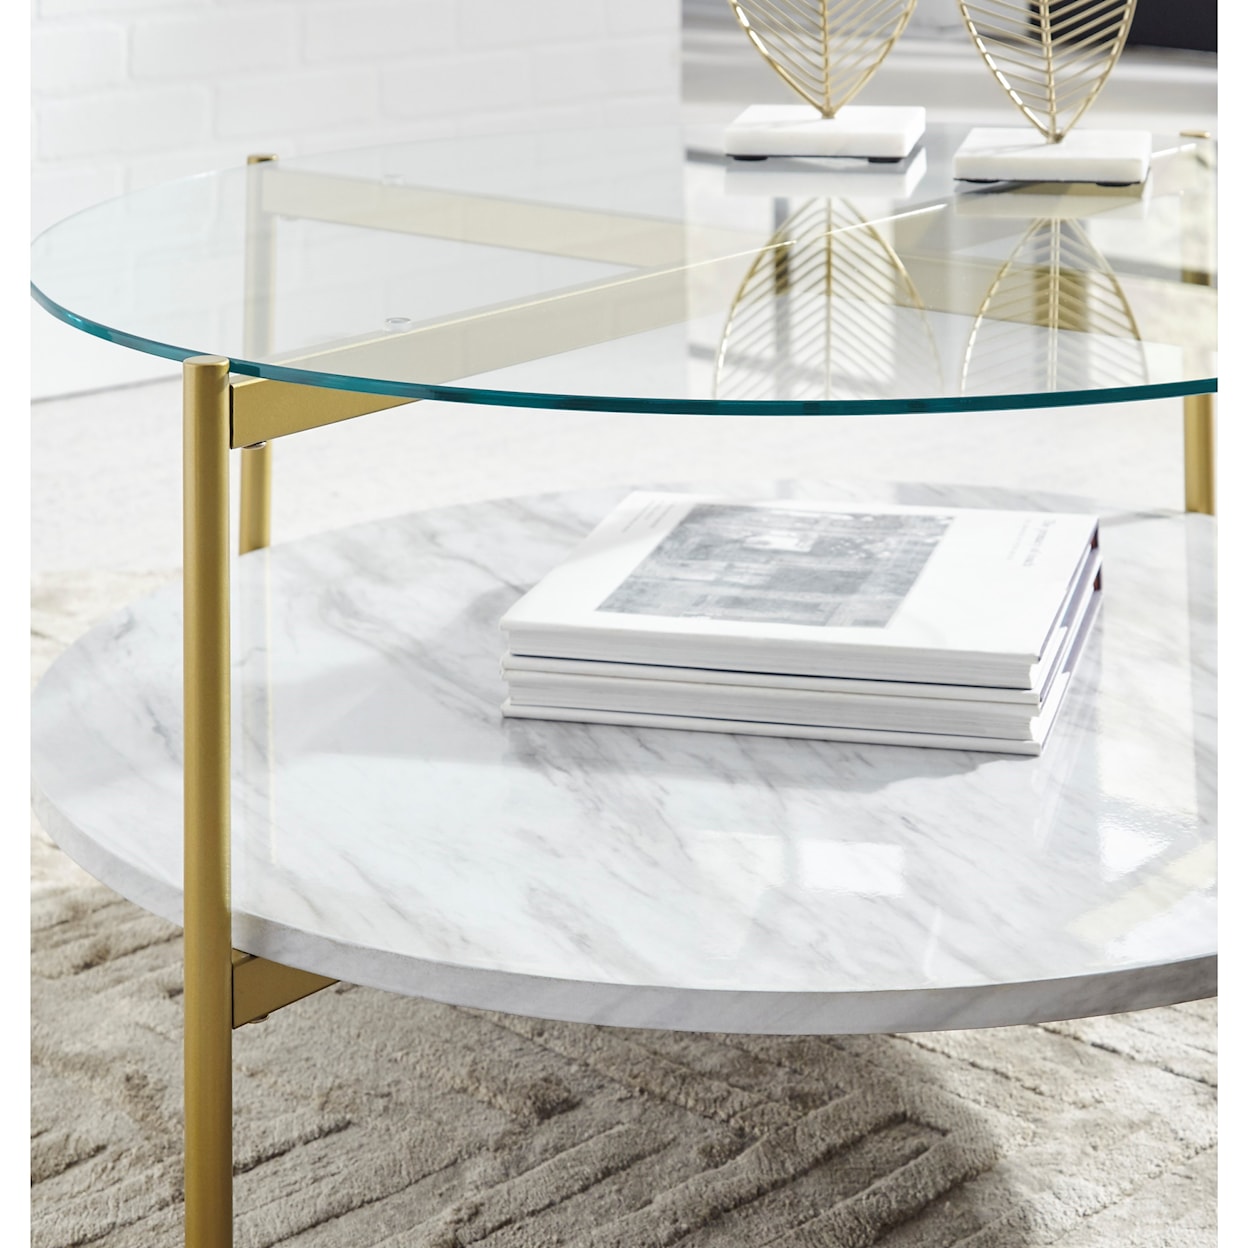 Signature Design by Ashley Furniture Wynora Round Cocktail Table